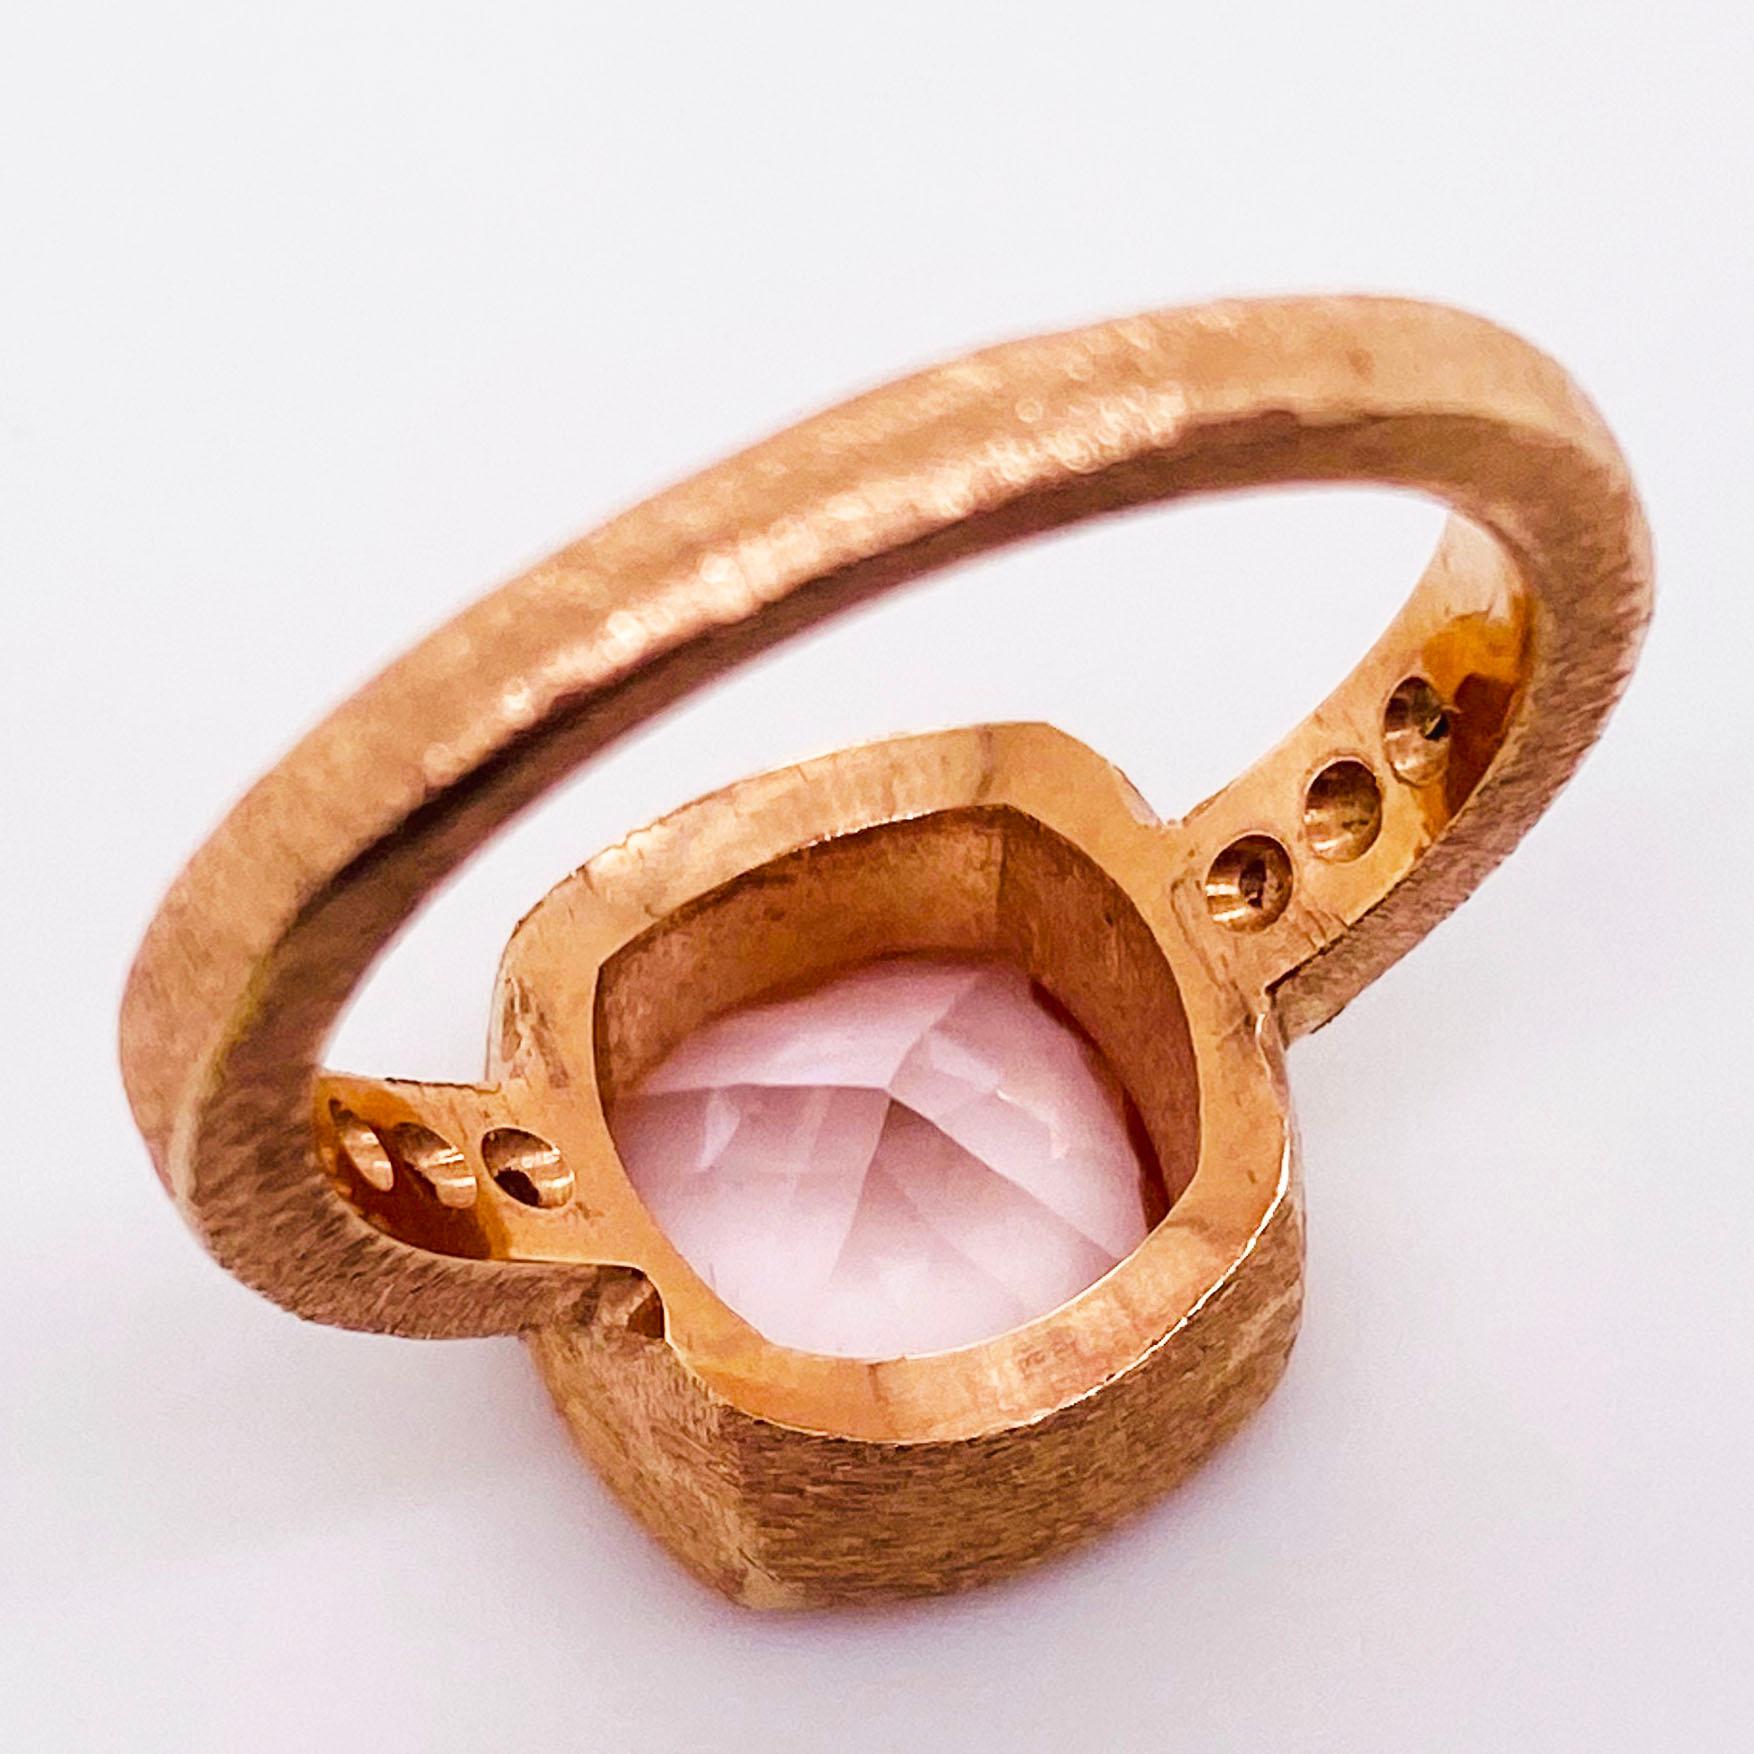 The custom morganite ring is a stunning piece with a genuine morganite gemstone set in a modern bezel setting. The morganite is cushion cut with a beautiful polish that sparkles brilliantly. The morganite is set in a hand fabricated satin bezel